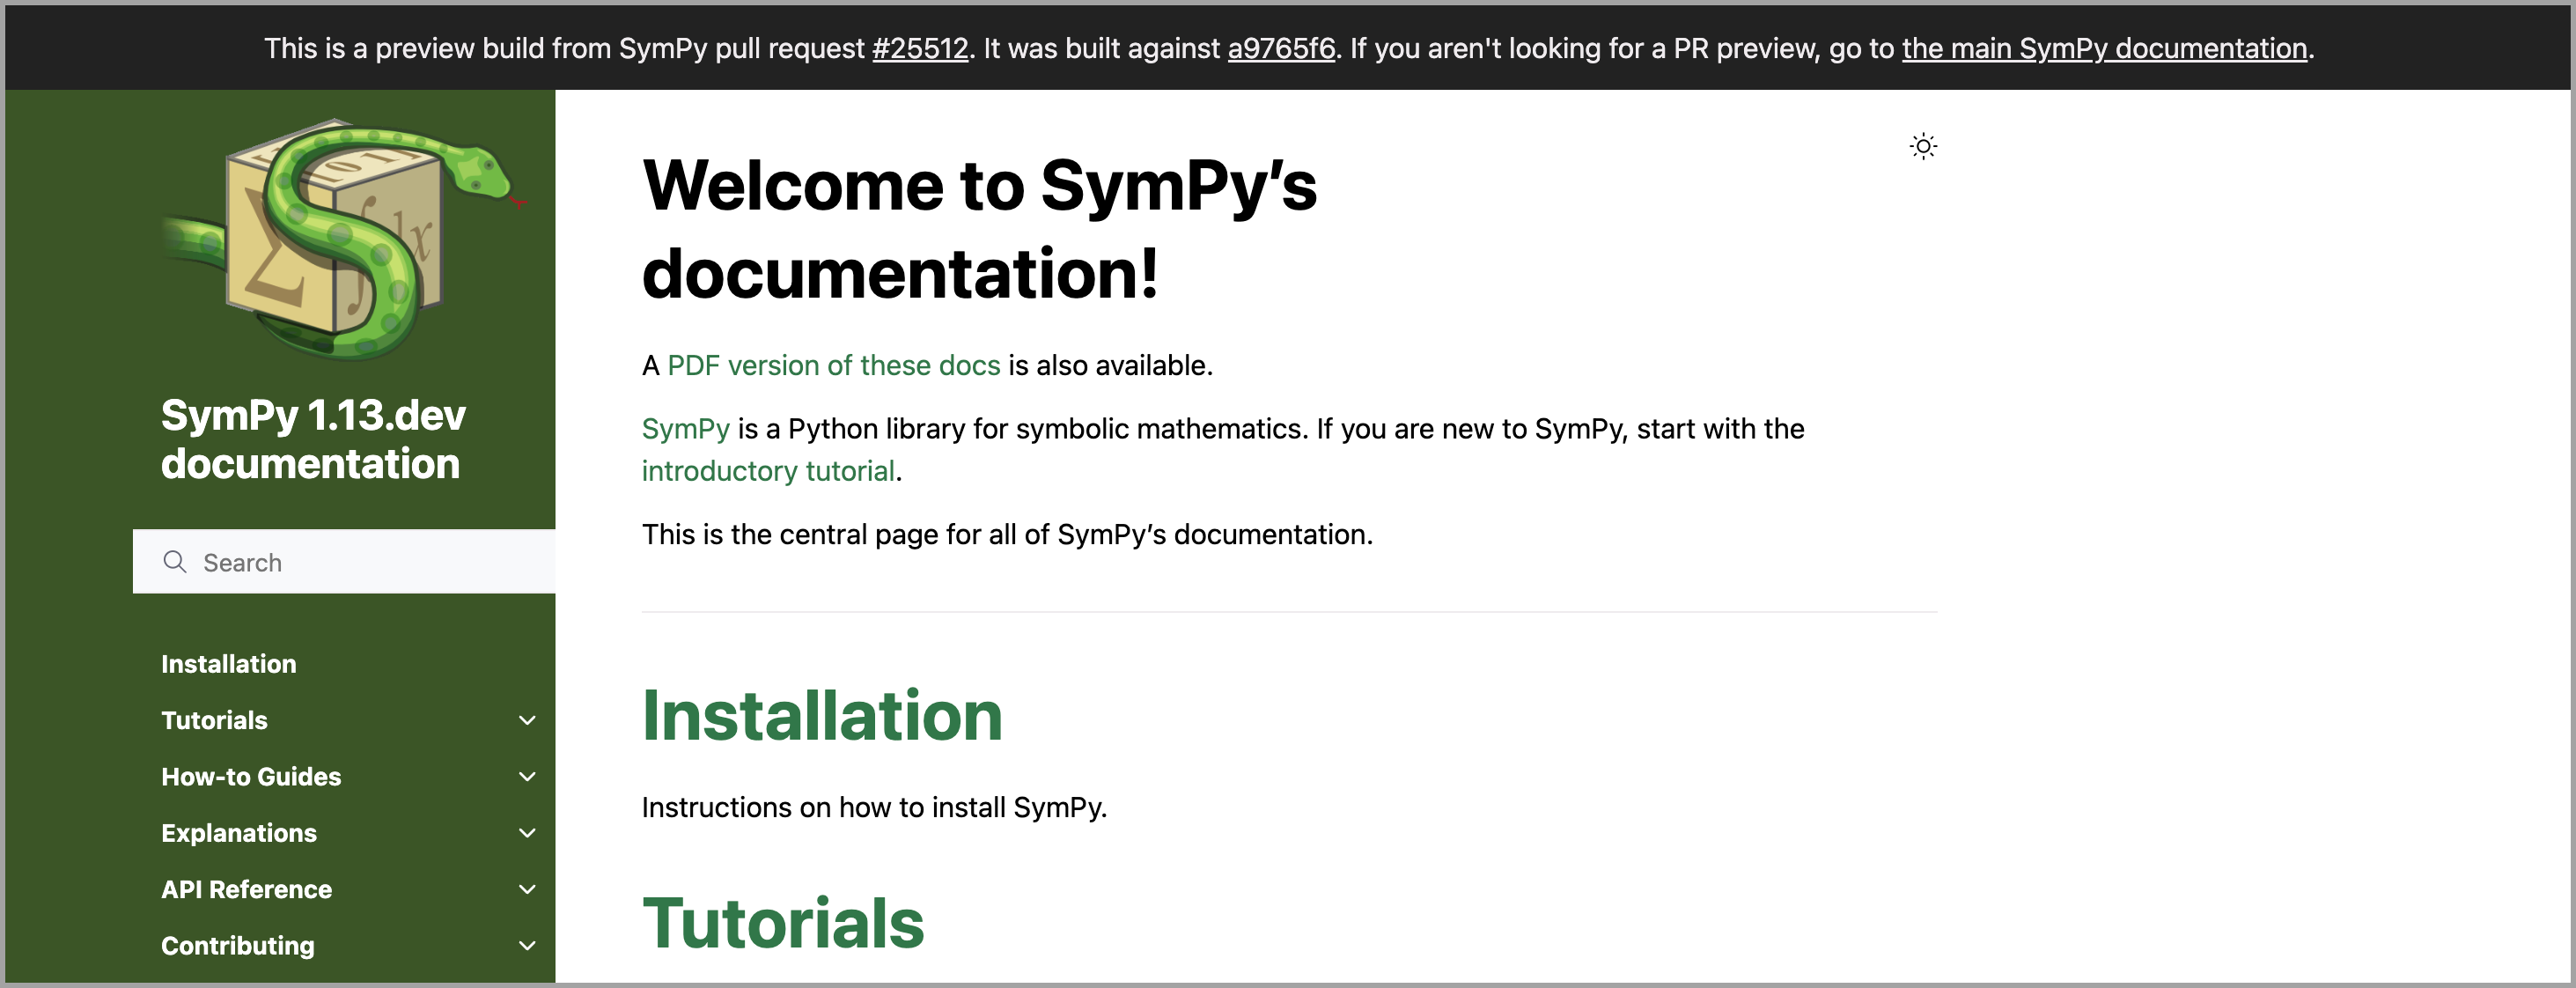 header on the page that says "This is a preview build from SymPy pull request #25512. It was built against a9765f6. If you aren't looking for a PR preview, go to the main SymPy documentation."